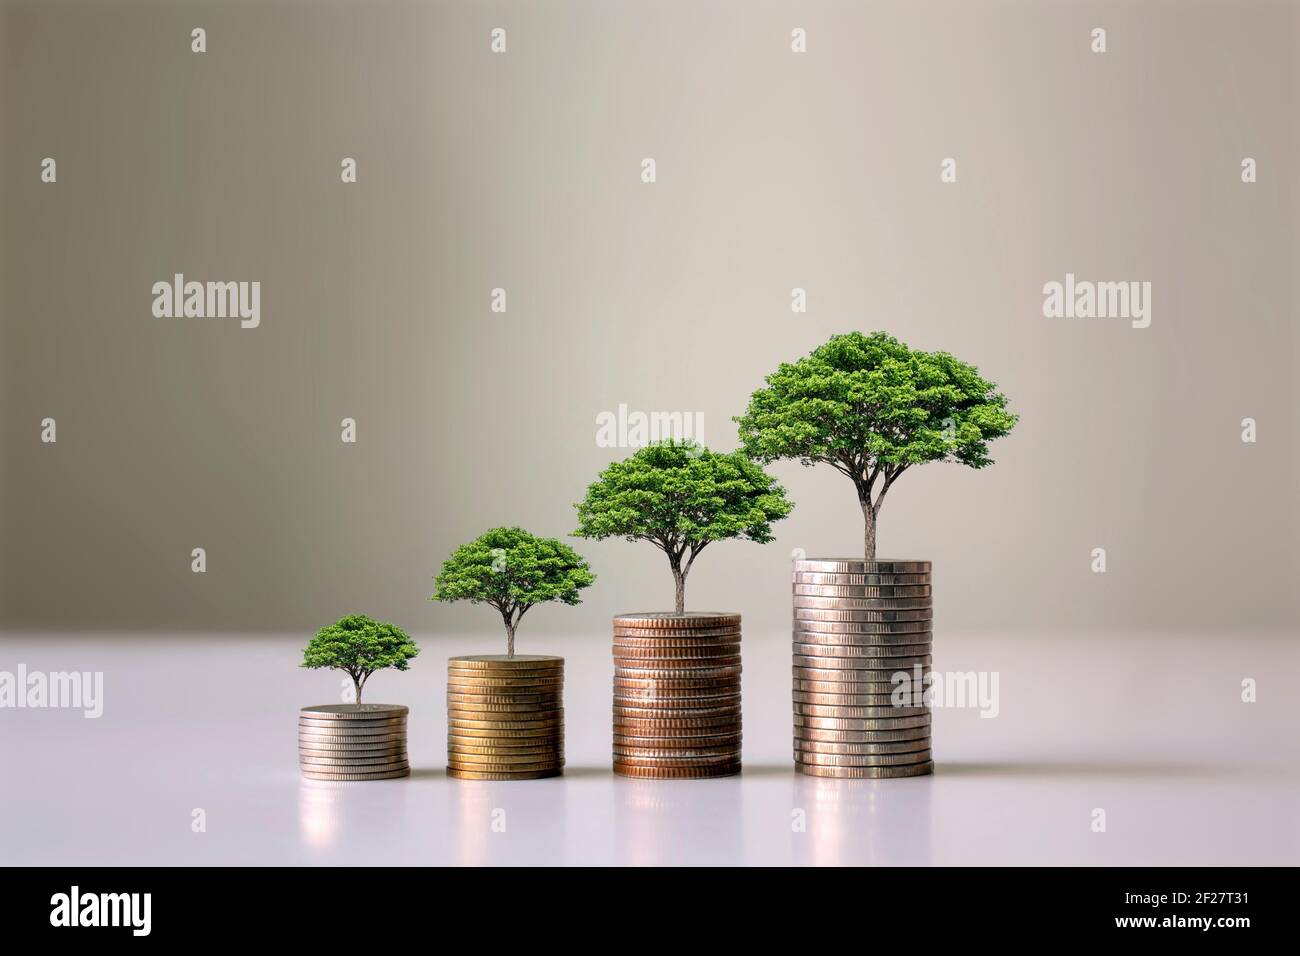 Showing financial developments and business growth with a growing tree on a coin. Stock Photo